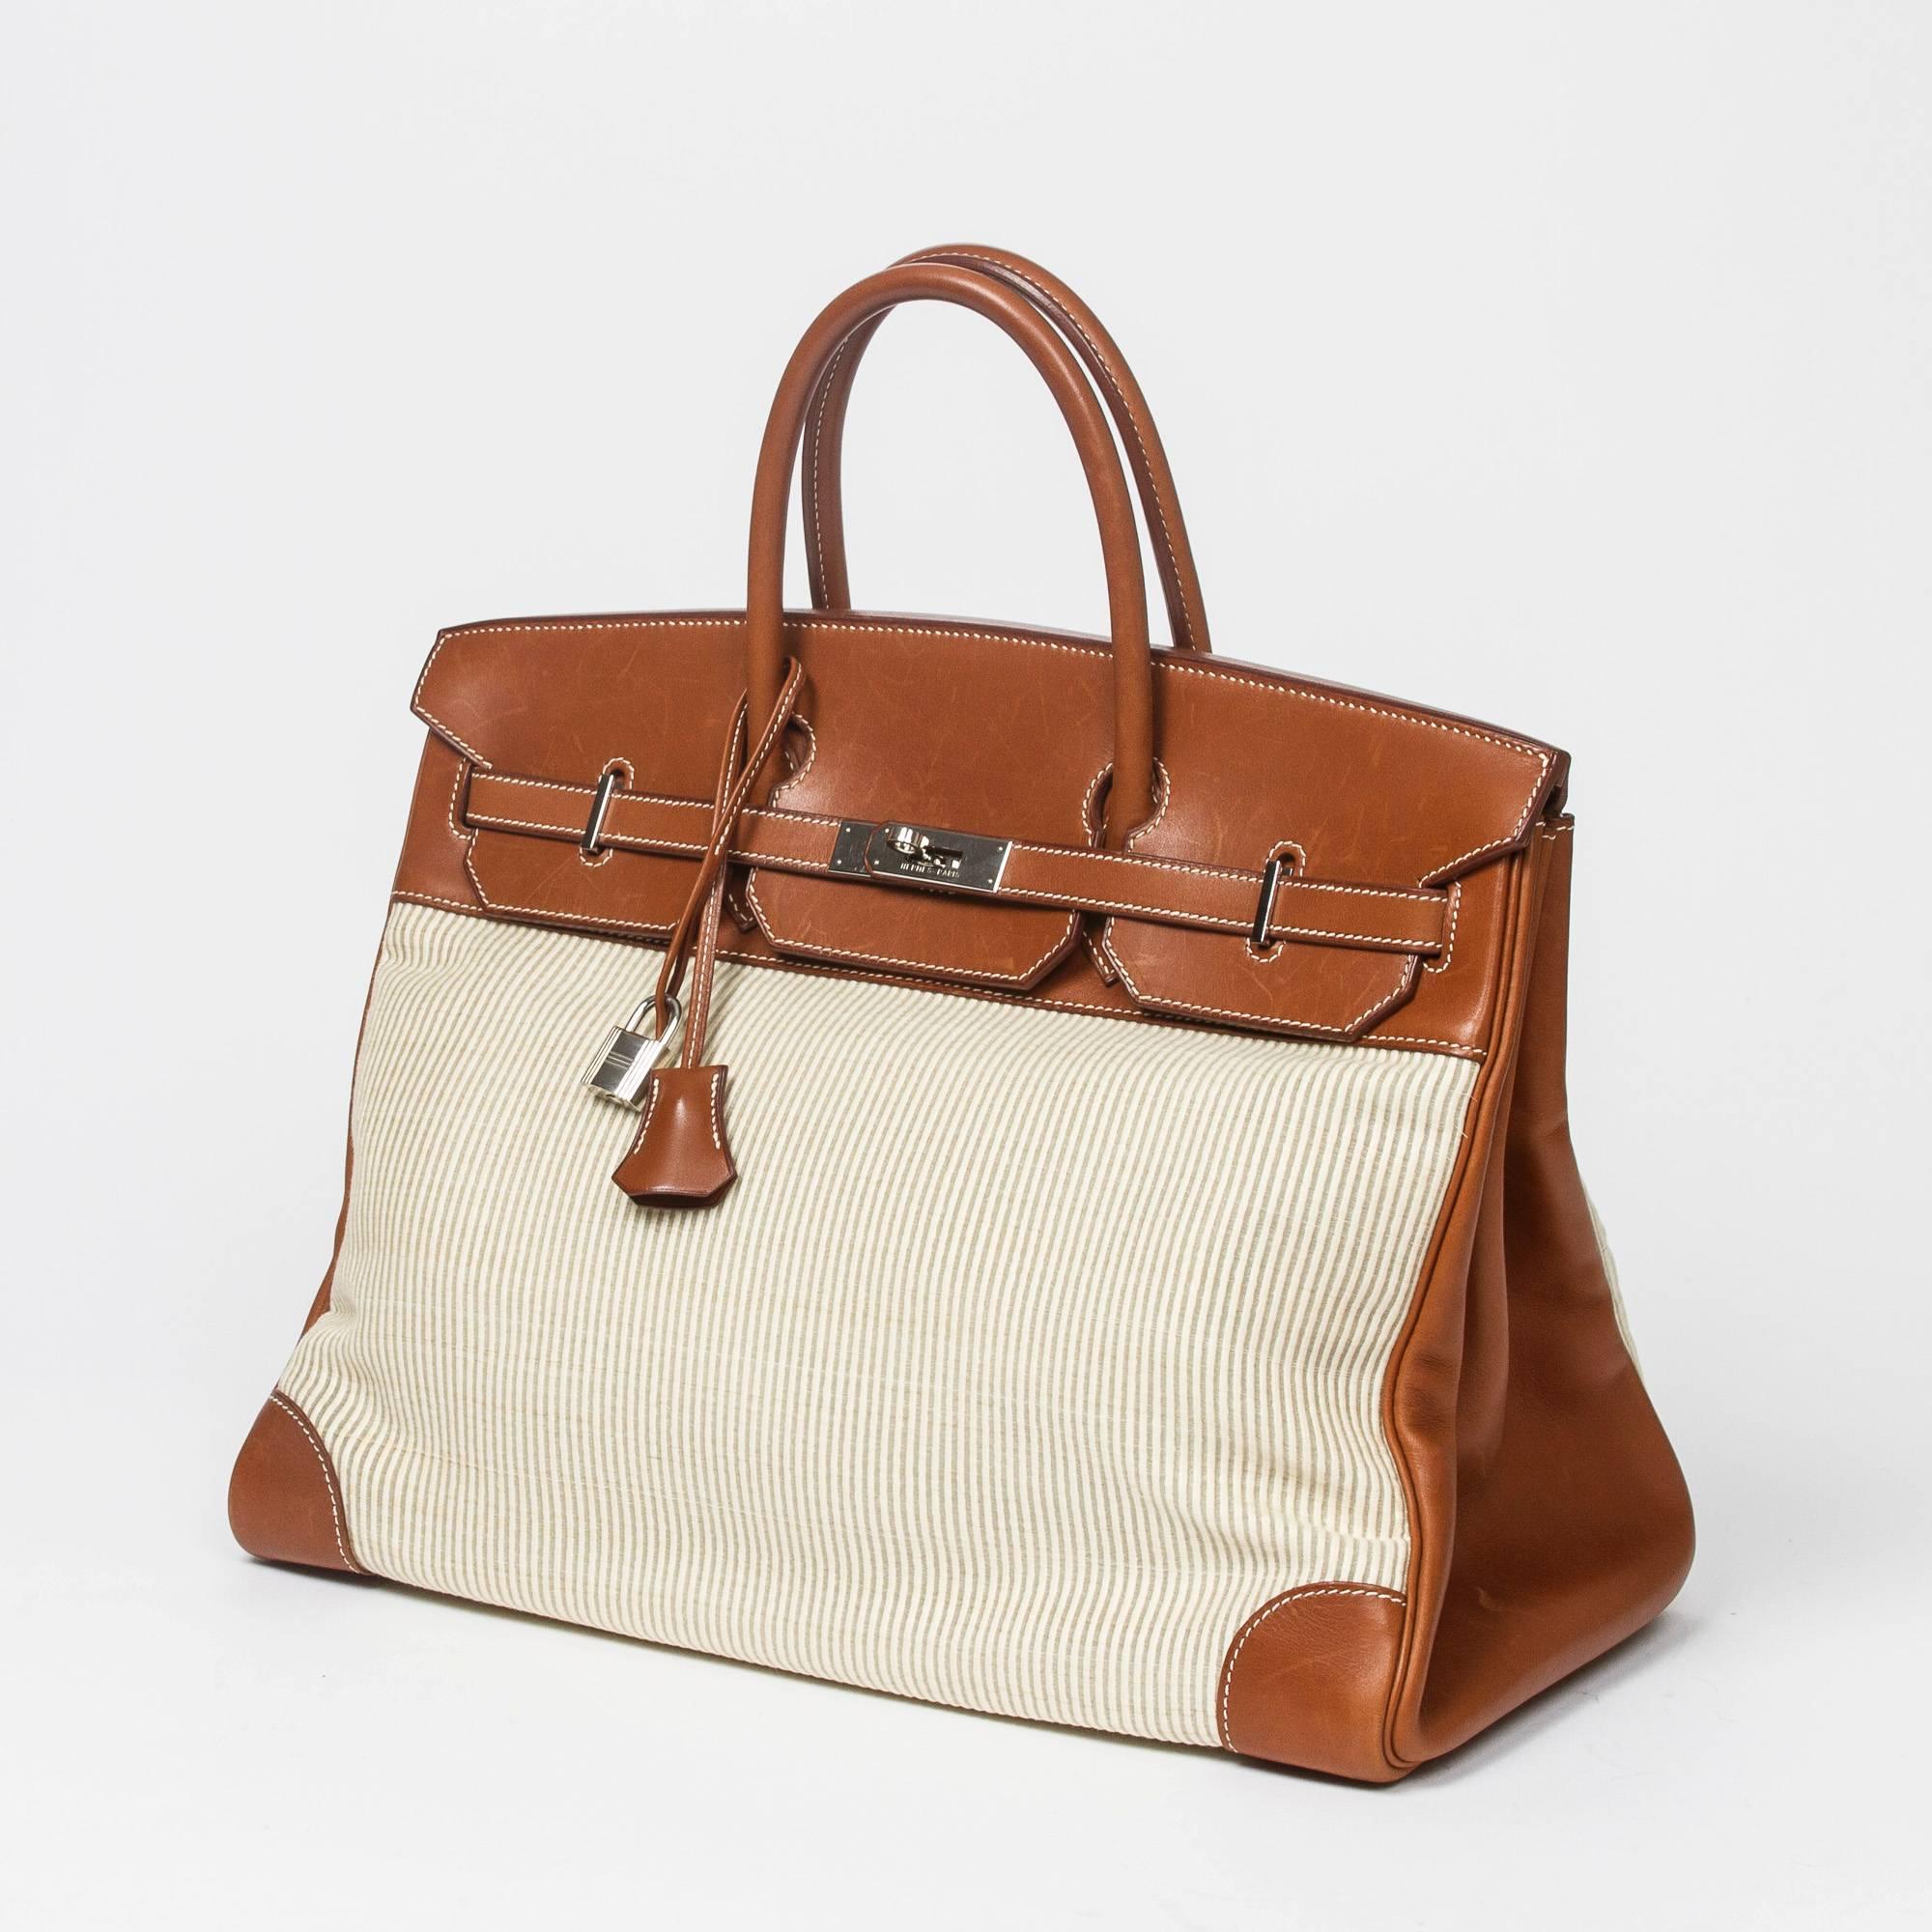 Birkin 40 in ivory Crinolin with Barenia leather handles and details, contasting white stichings, cadenas and keys in clochette, silver tone hardware. Barenia leather and beige chevron fabric lined interior with 2 slip pockets. Dustbag included.